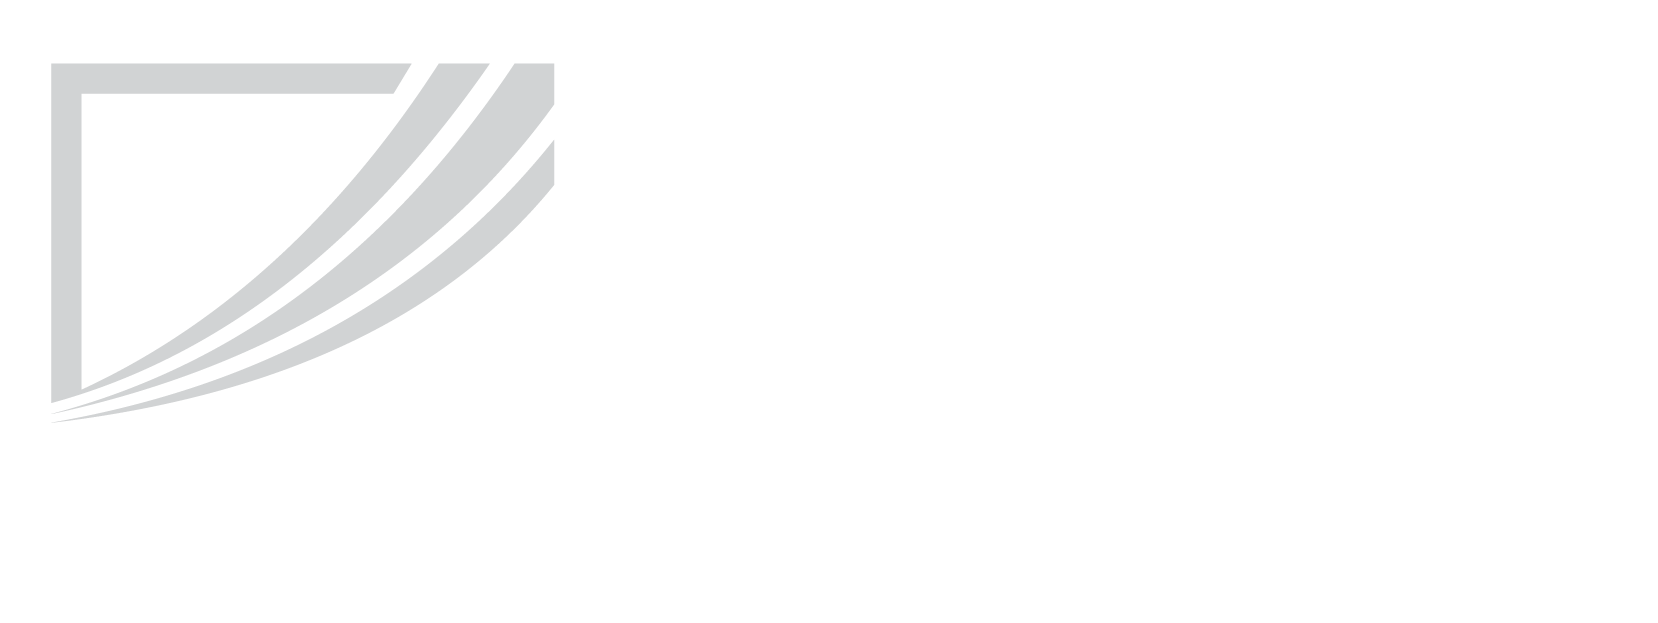 Meyer Financial Services